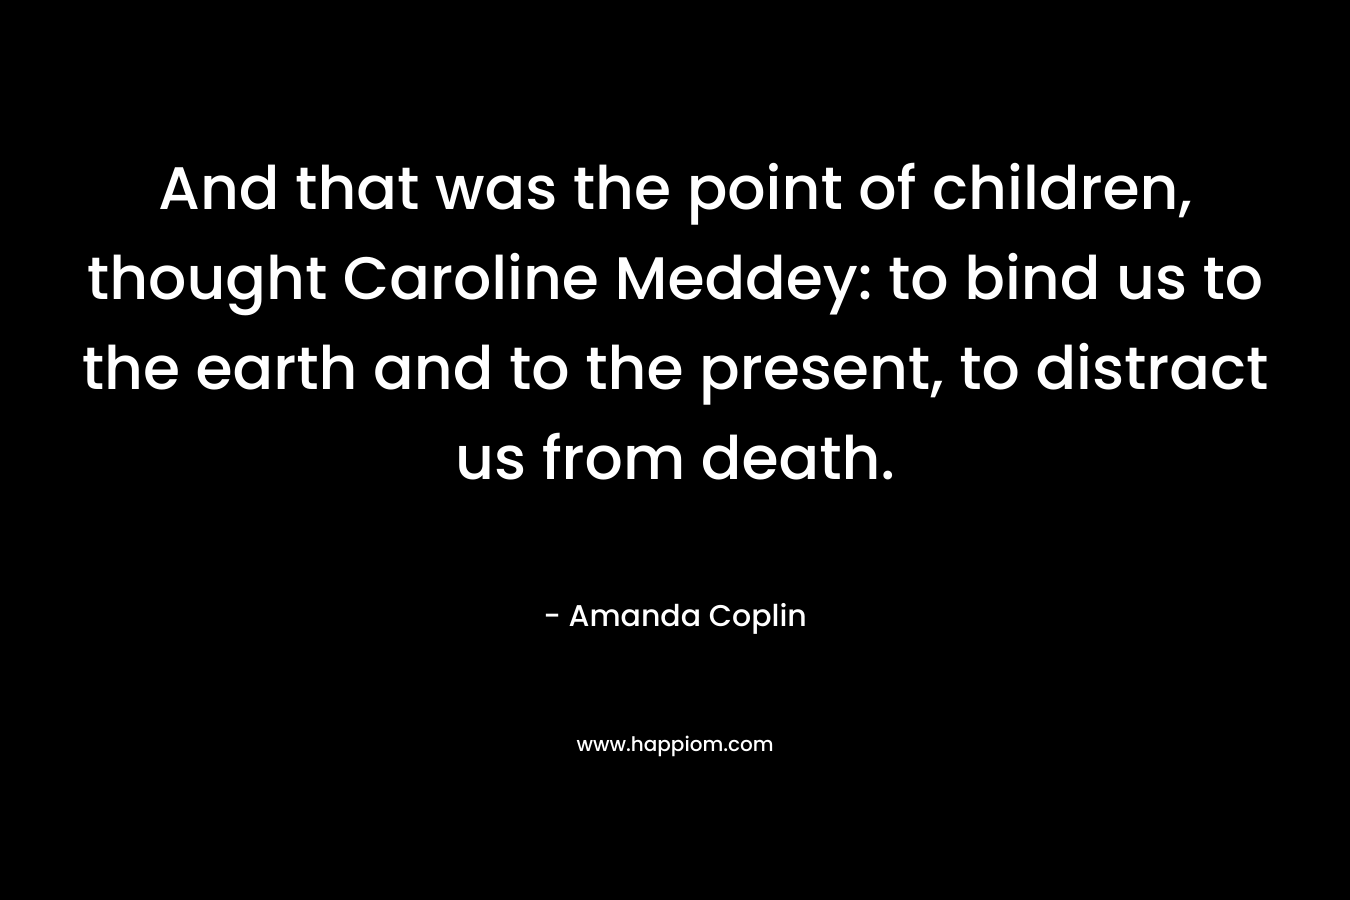 And that was the point of children, thought Caroline Meddey: to bind us to the earth and to the present, to distract us from death.